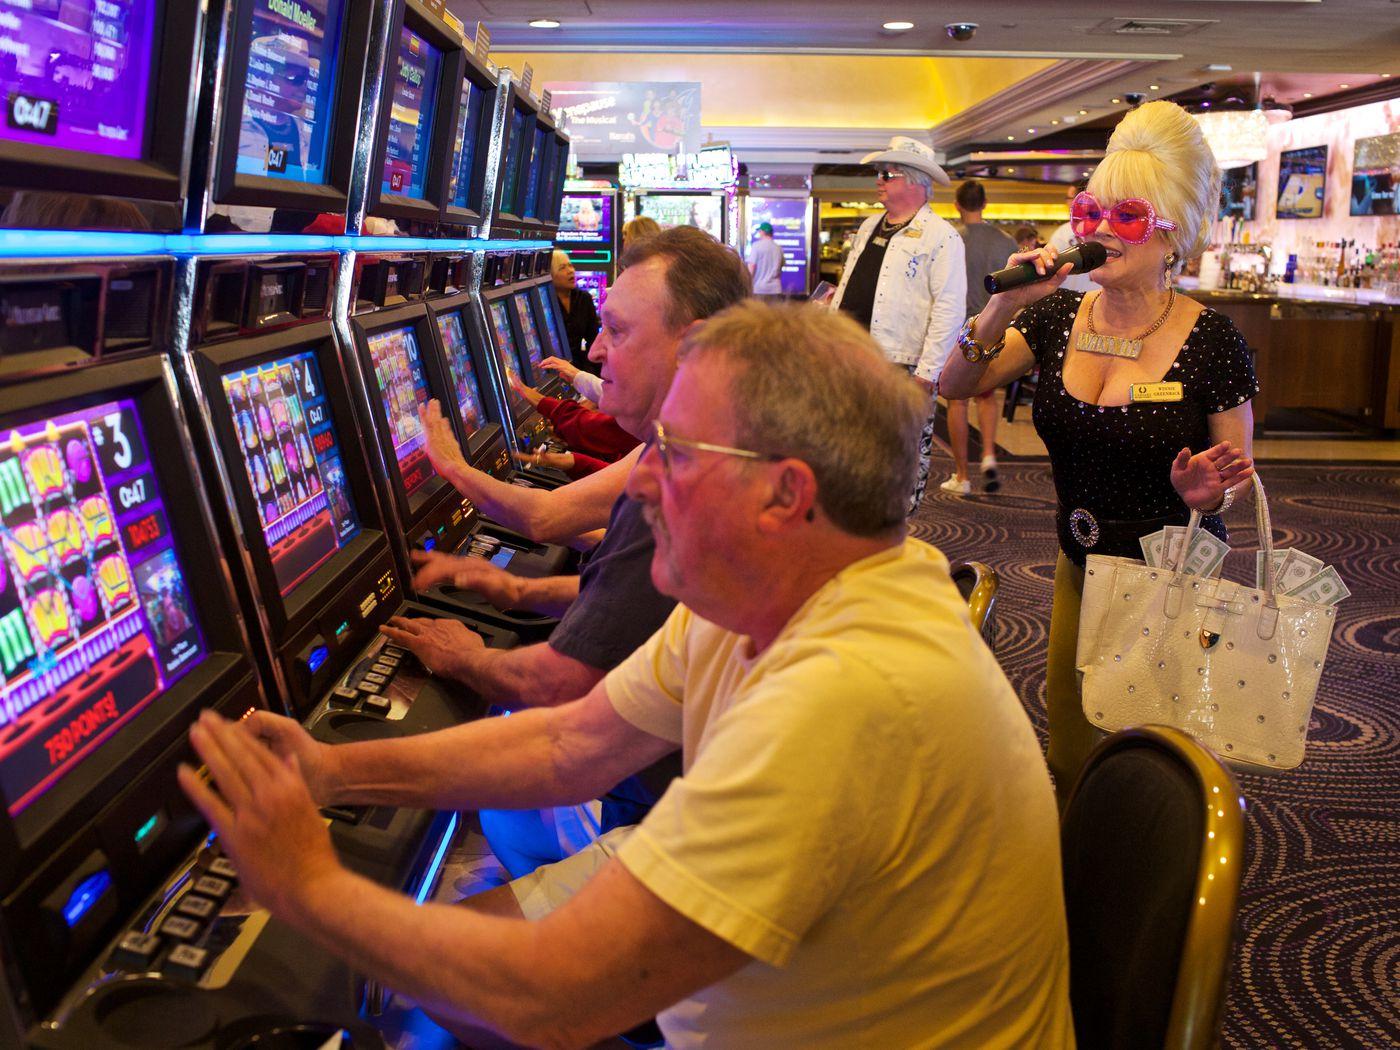 Slot machines perfected addictive gaming. Now, tech wants their tricks - The Verge